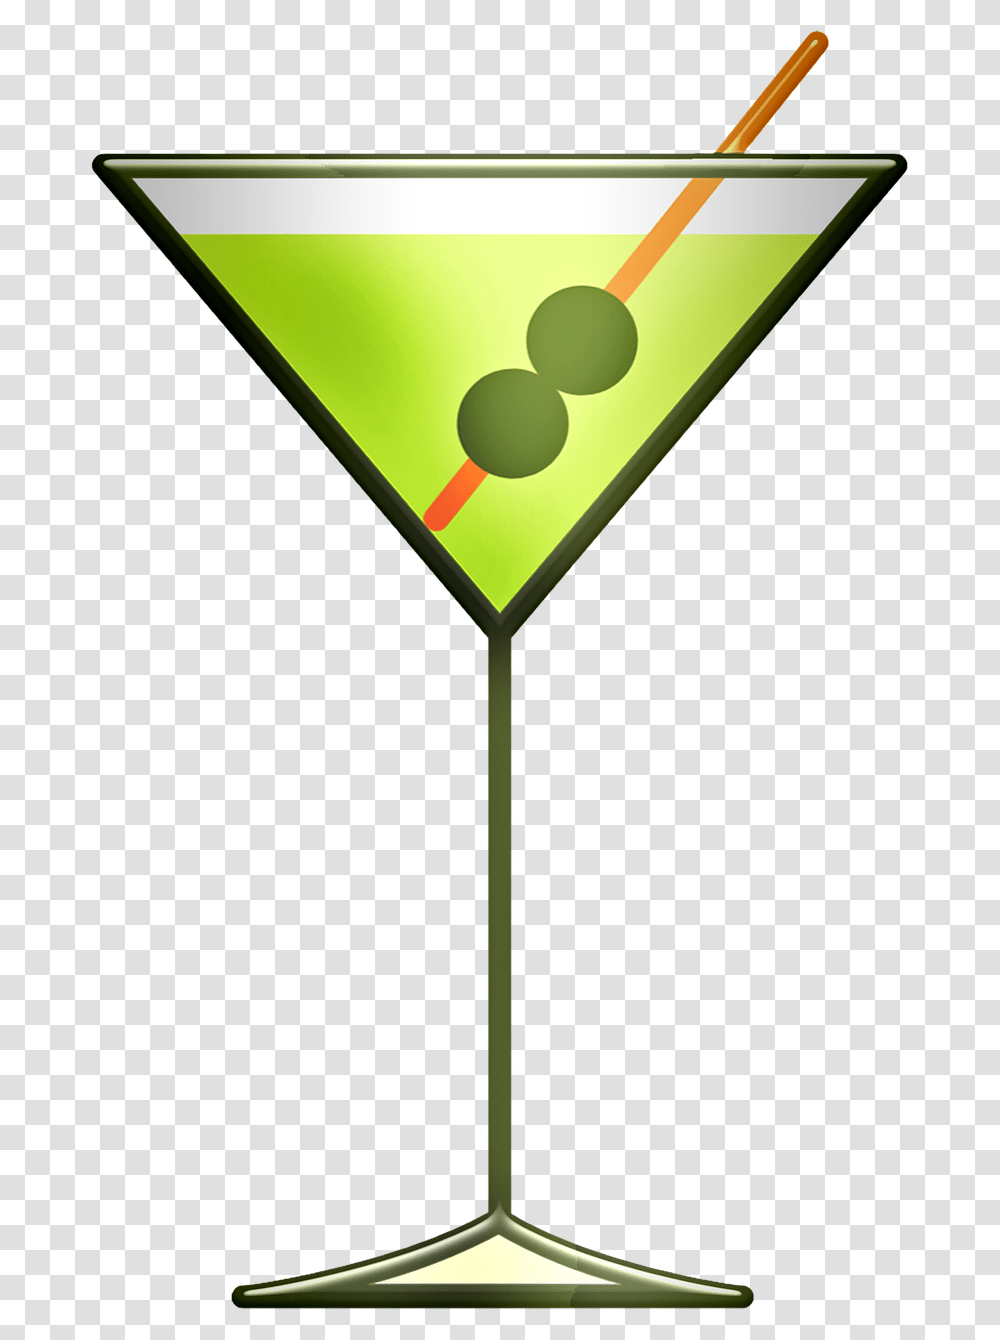 Martini Drink Alcohol Cocktail Alcoholic Party Martini Drink Clip Art, Lamp, Sign, Light Transparent Png